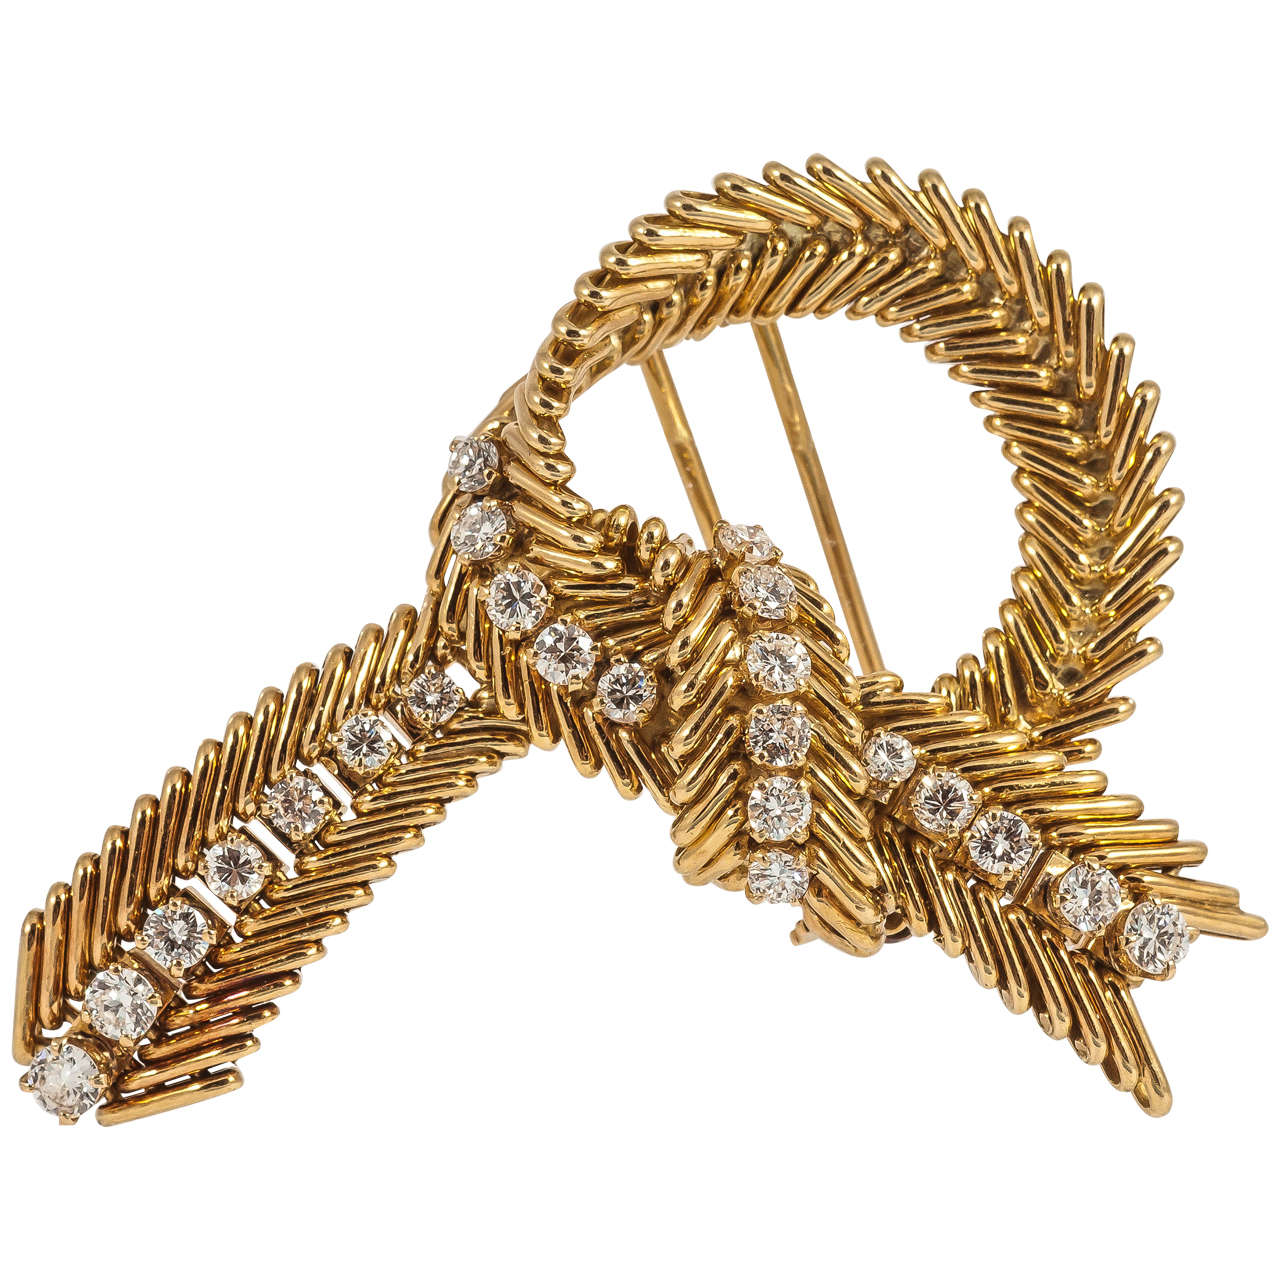 1960s Van Cleef & Arpels Diamond Gold Knot Pin For Sale